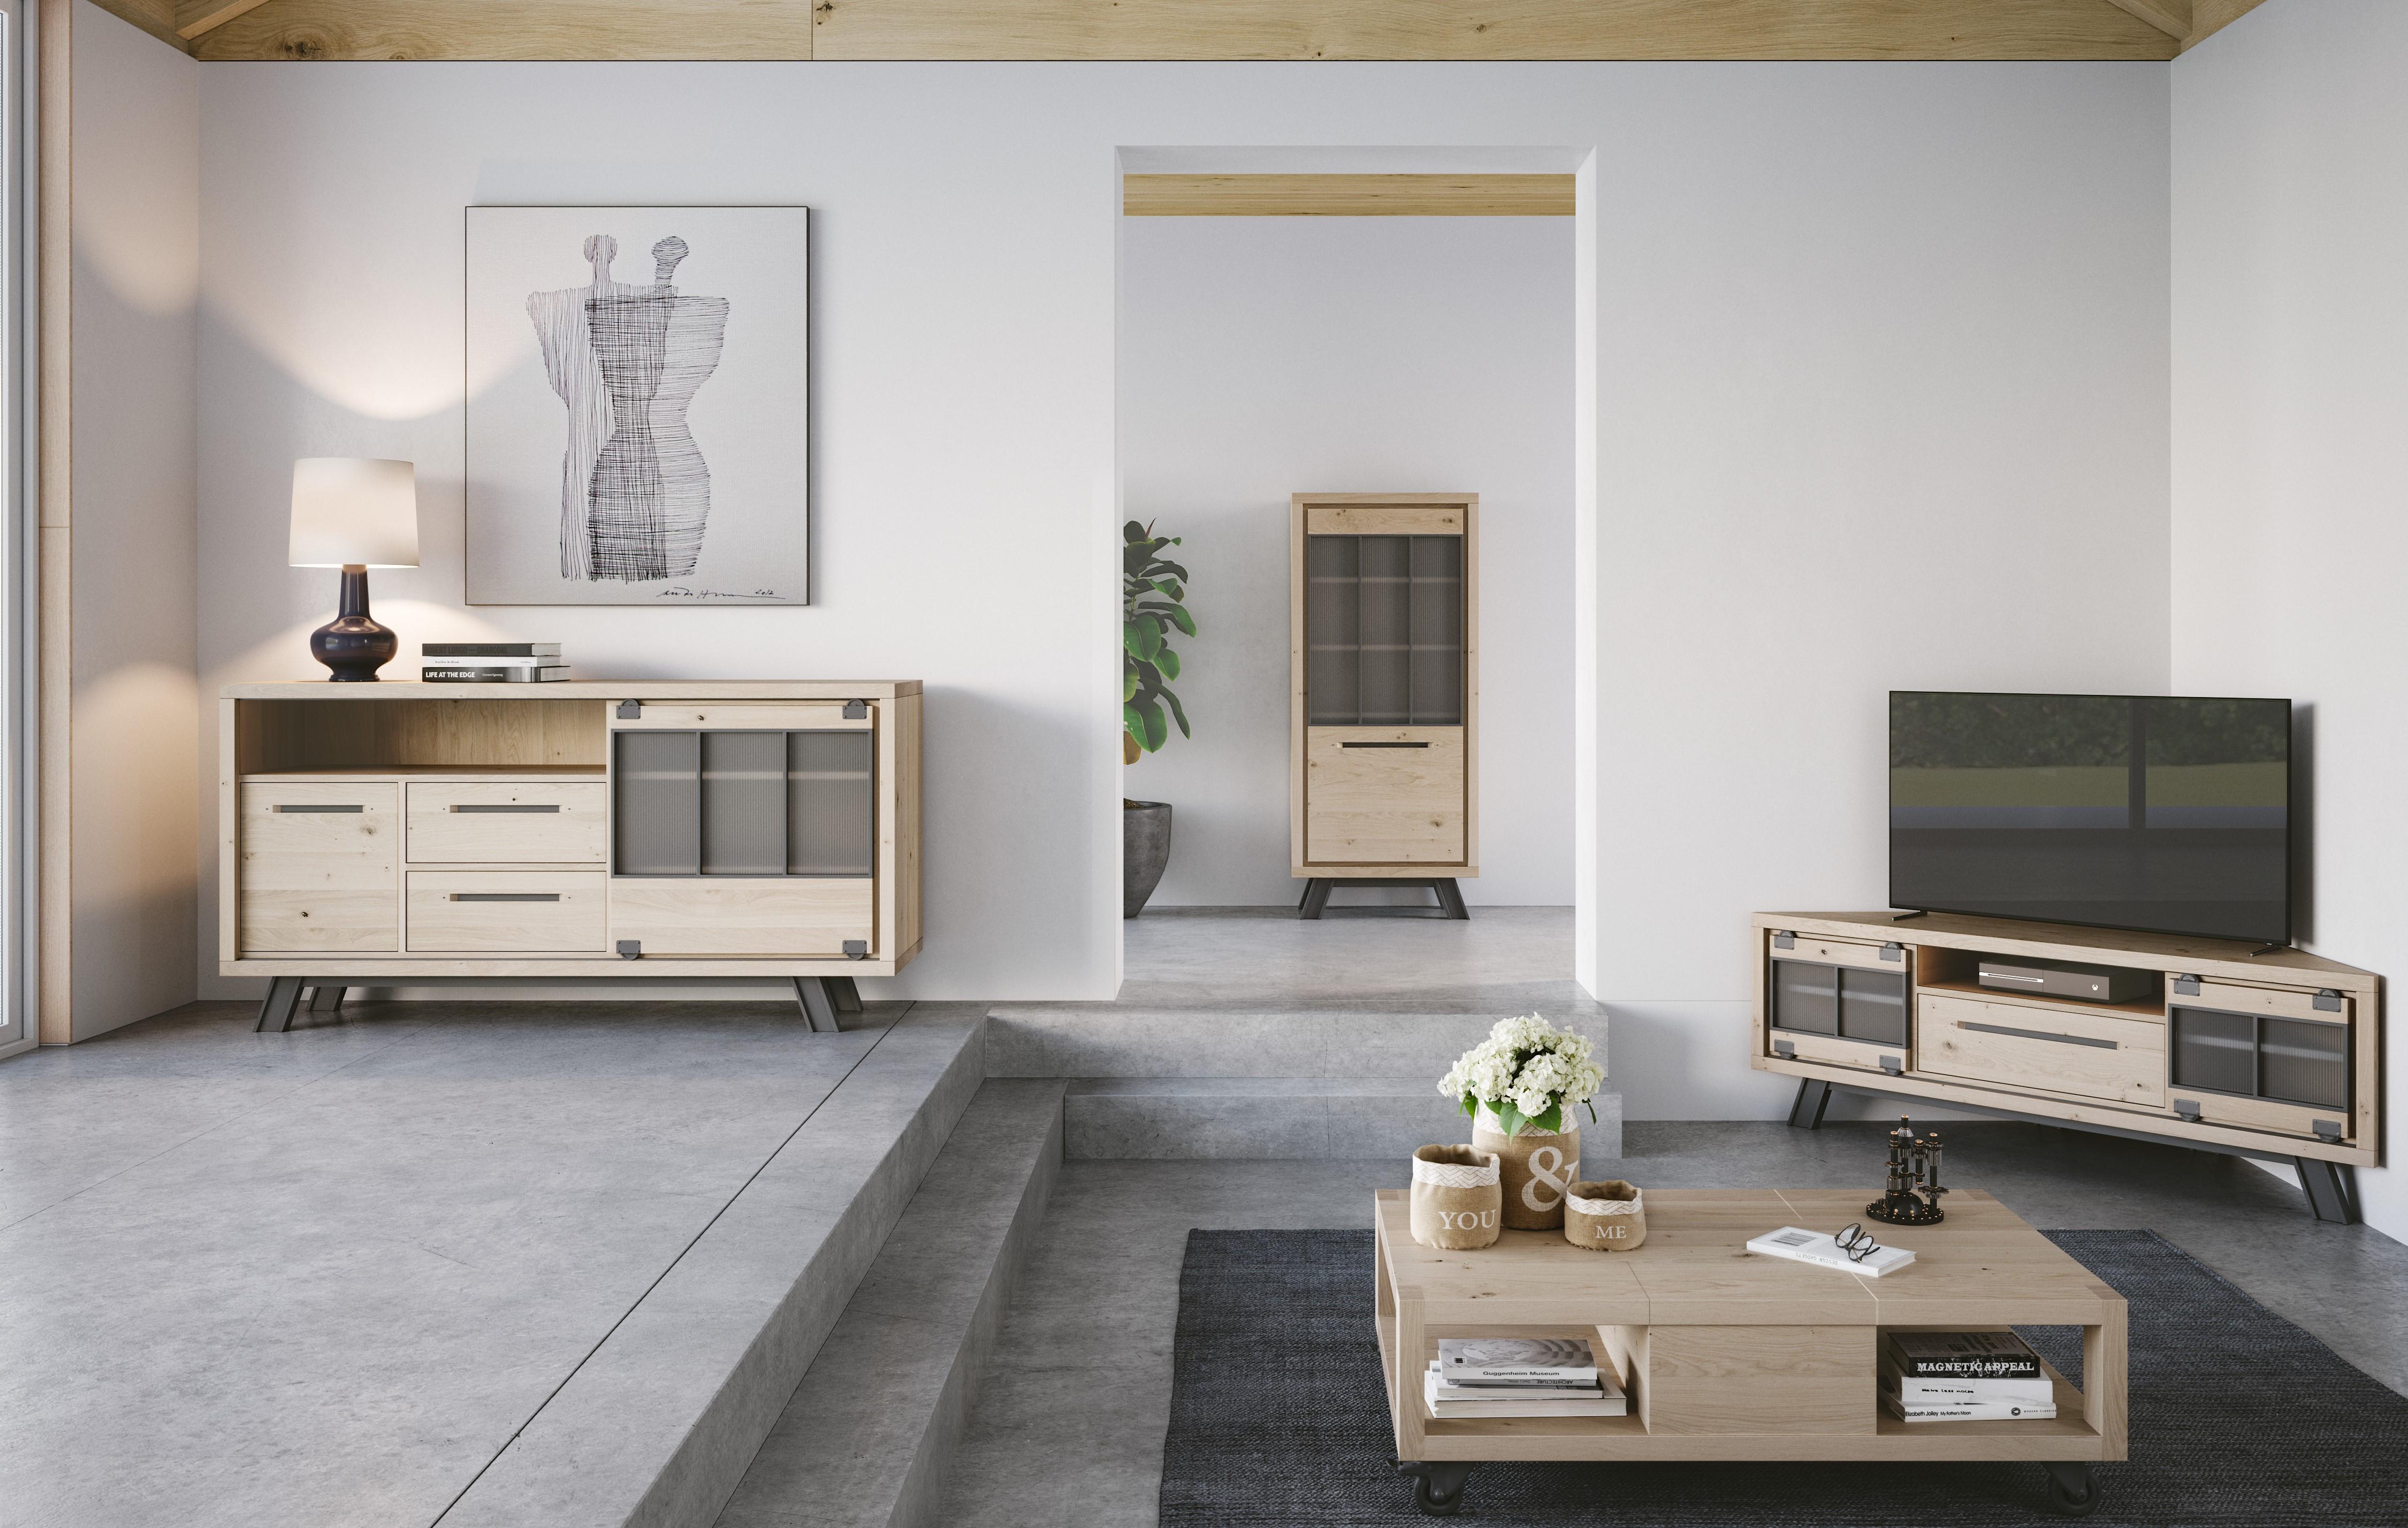 The ST James collection incorporates glass and metel details in its furniture pieces that give them a sober and industrial look without compromising their versatility.

Produced by Cacio with more than 70 years of know how, this piece is made to